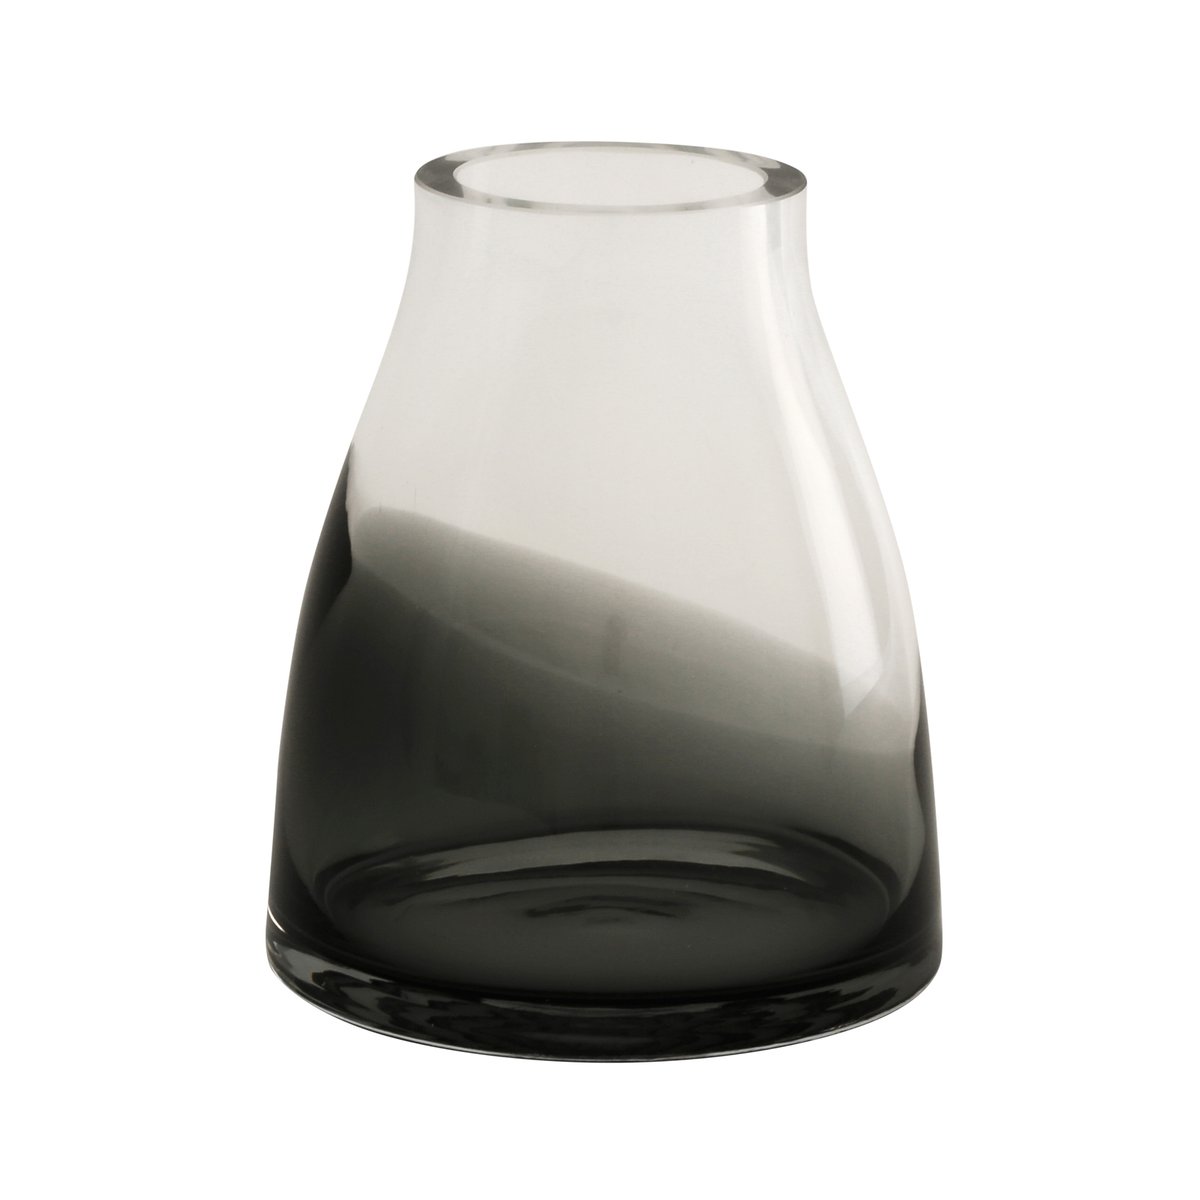 Ro Collection Flower vase no. 2 Smoked grey (5712129002302)